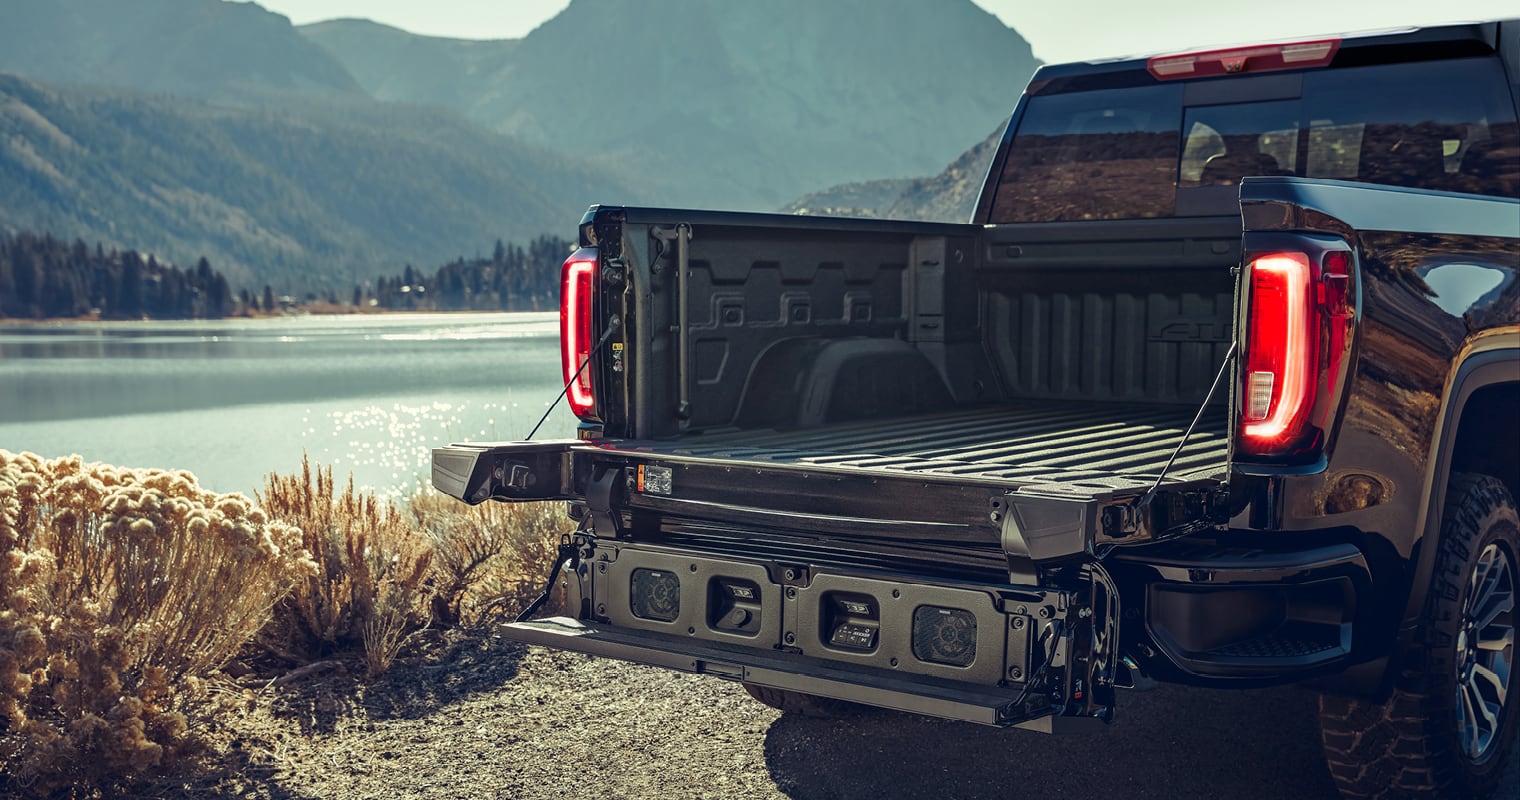 2022 GMC Sierra 1500 truck with MultiPro tailgate